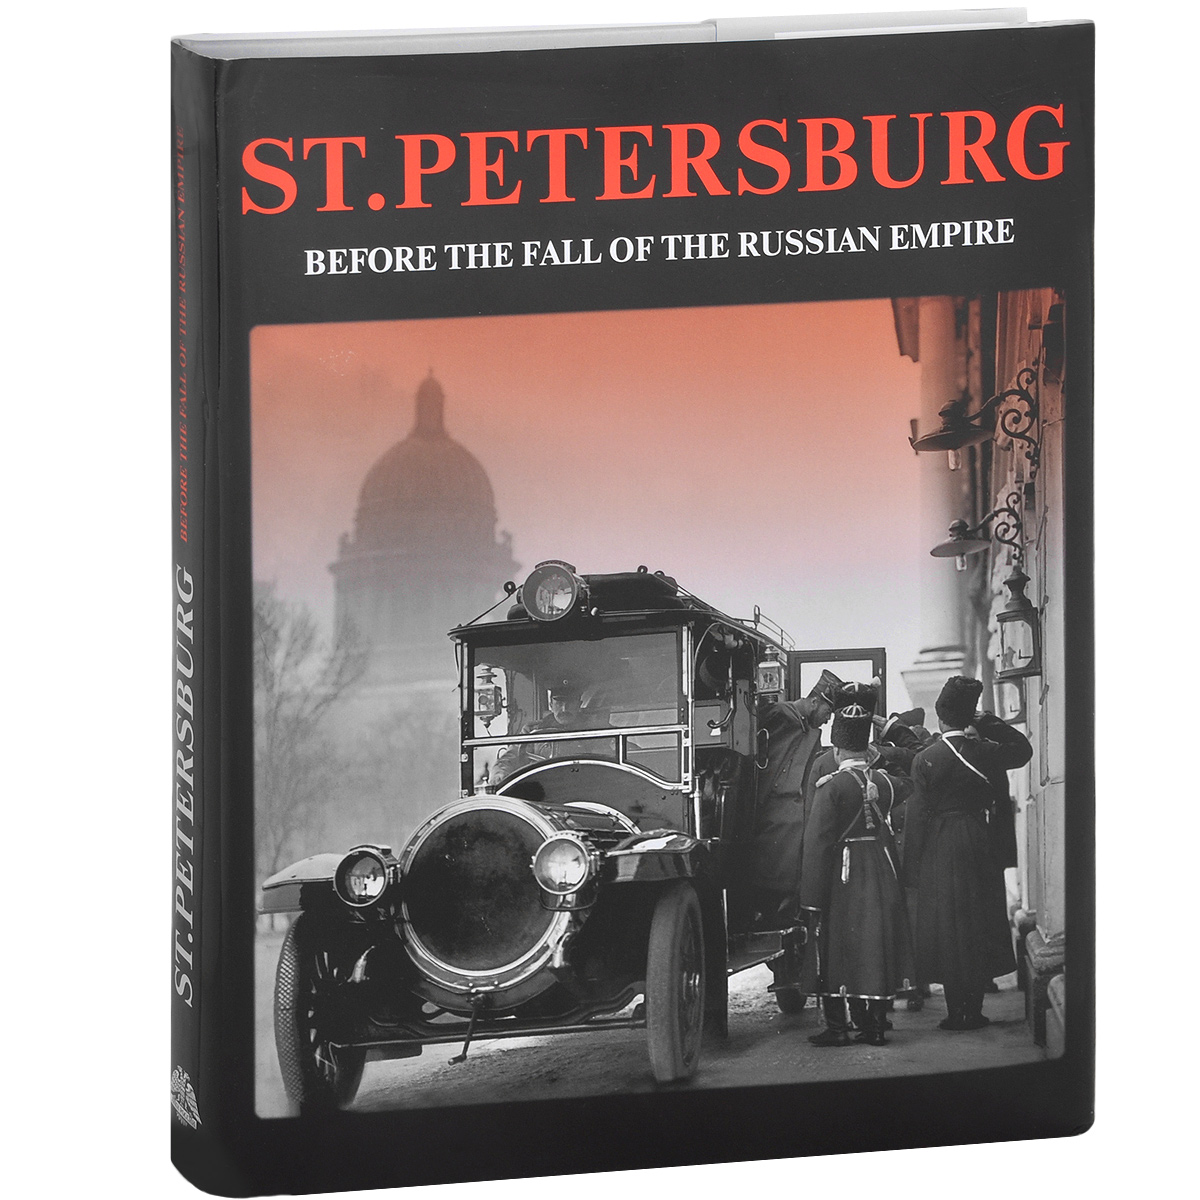 St. Petersburg Before the Fall of the Russian Empire